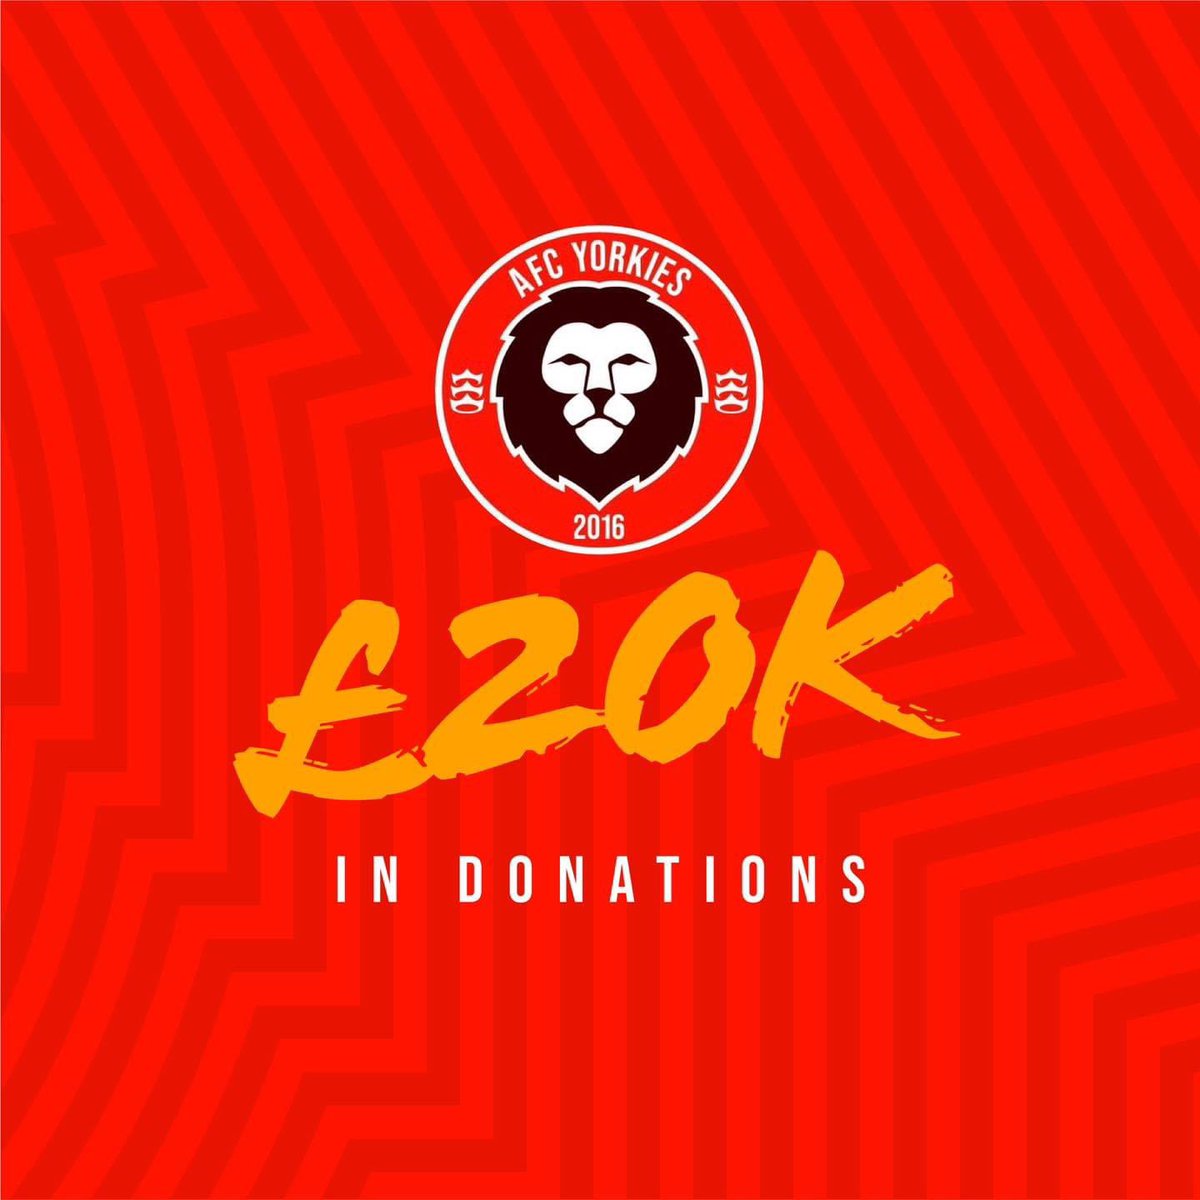 We’ve hit the £20k mark!! 🥳 Since being formed back in 2016 we’ve managed to donate over £20,000 to charities and good causes, fantastic achievement by all the Yorkies members, past and present 👏🏼